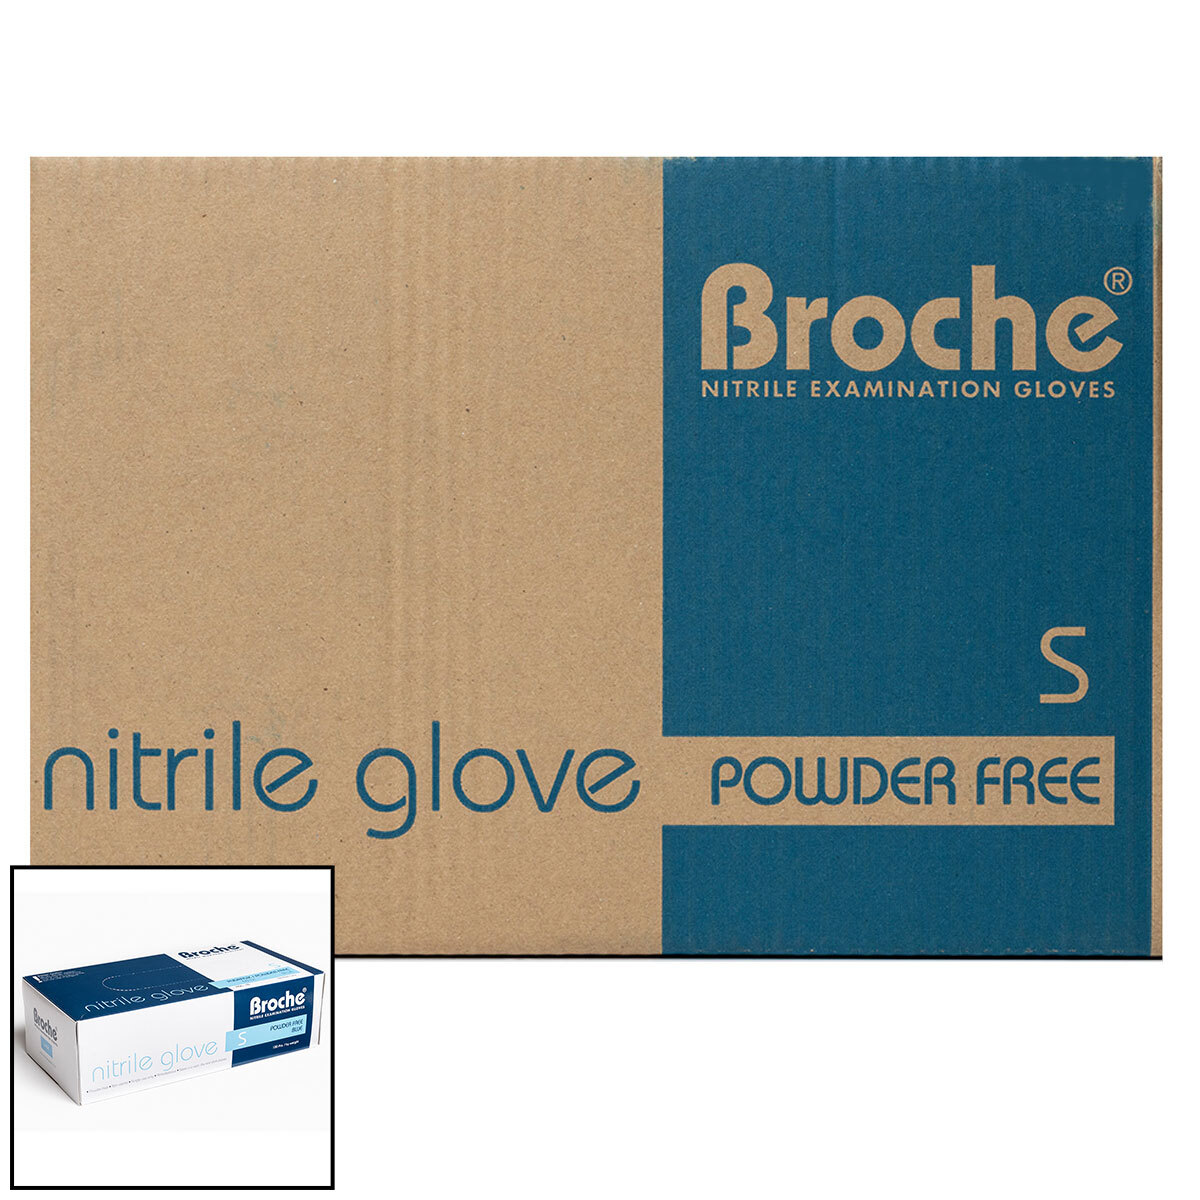 Broche Nitrile Gloves - Small, 10 x 100 Pack Box with Inset